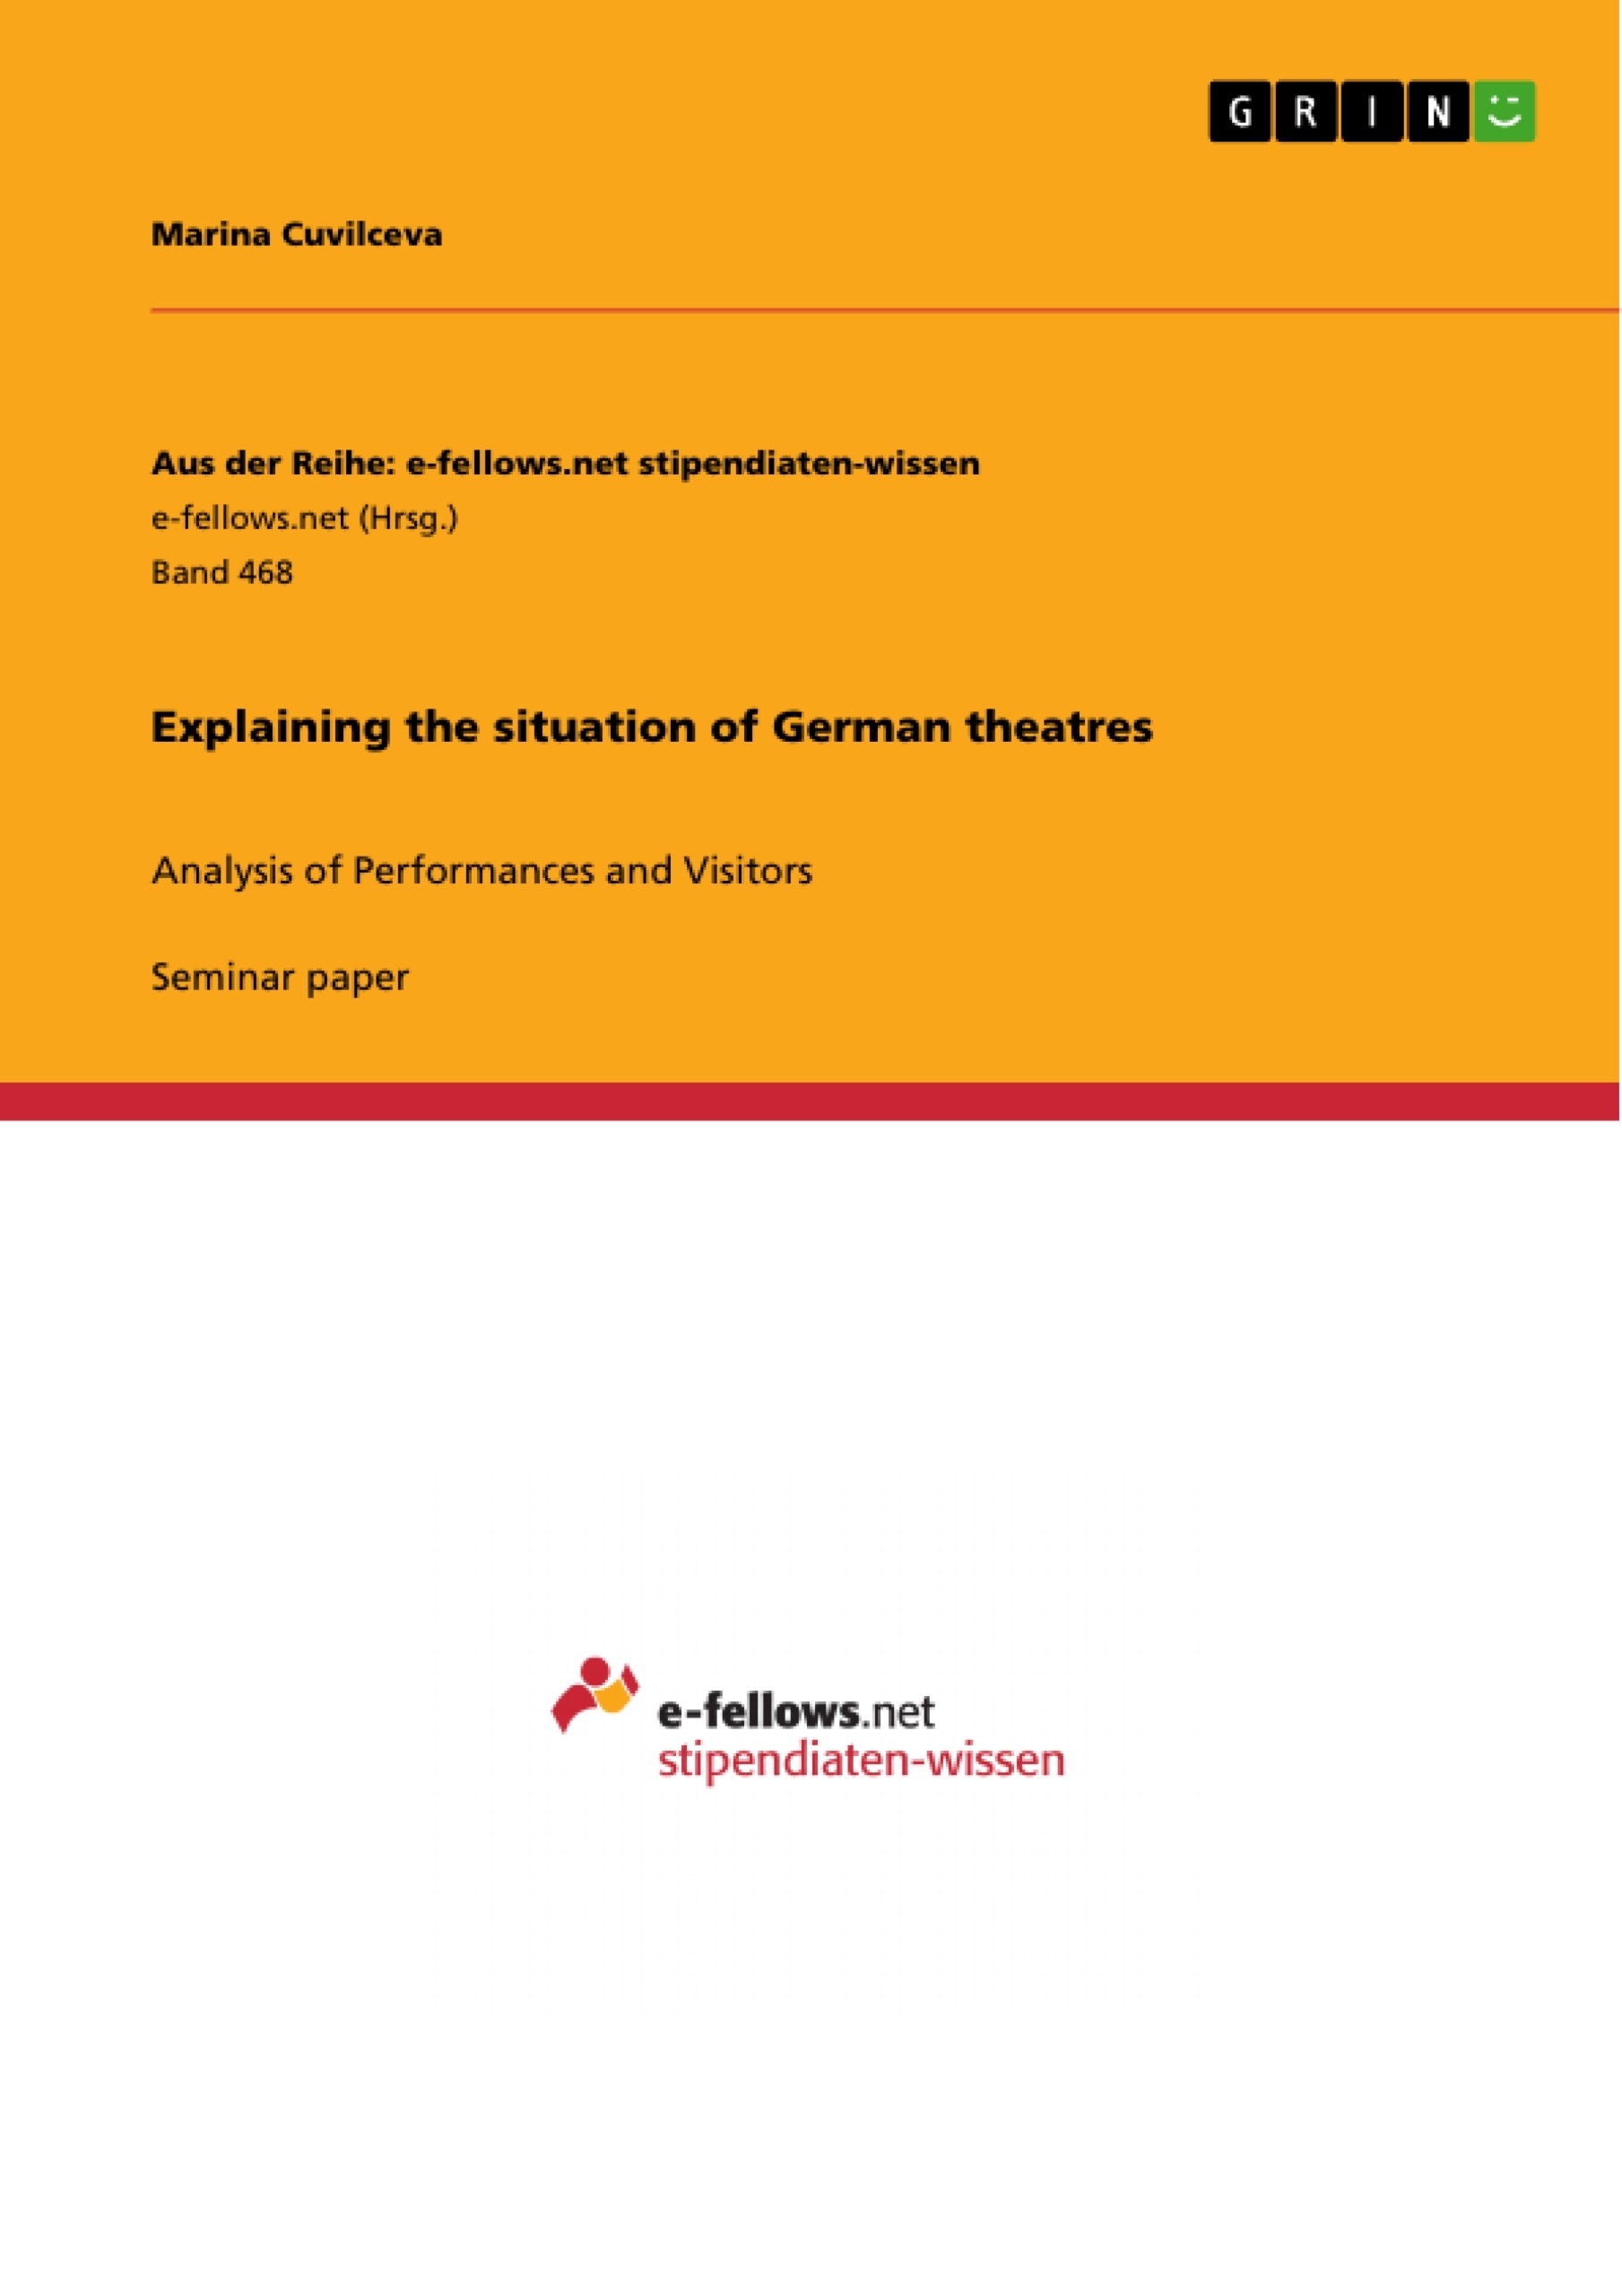 Title: Explaining the situation of German theatres